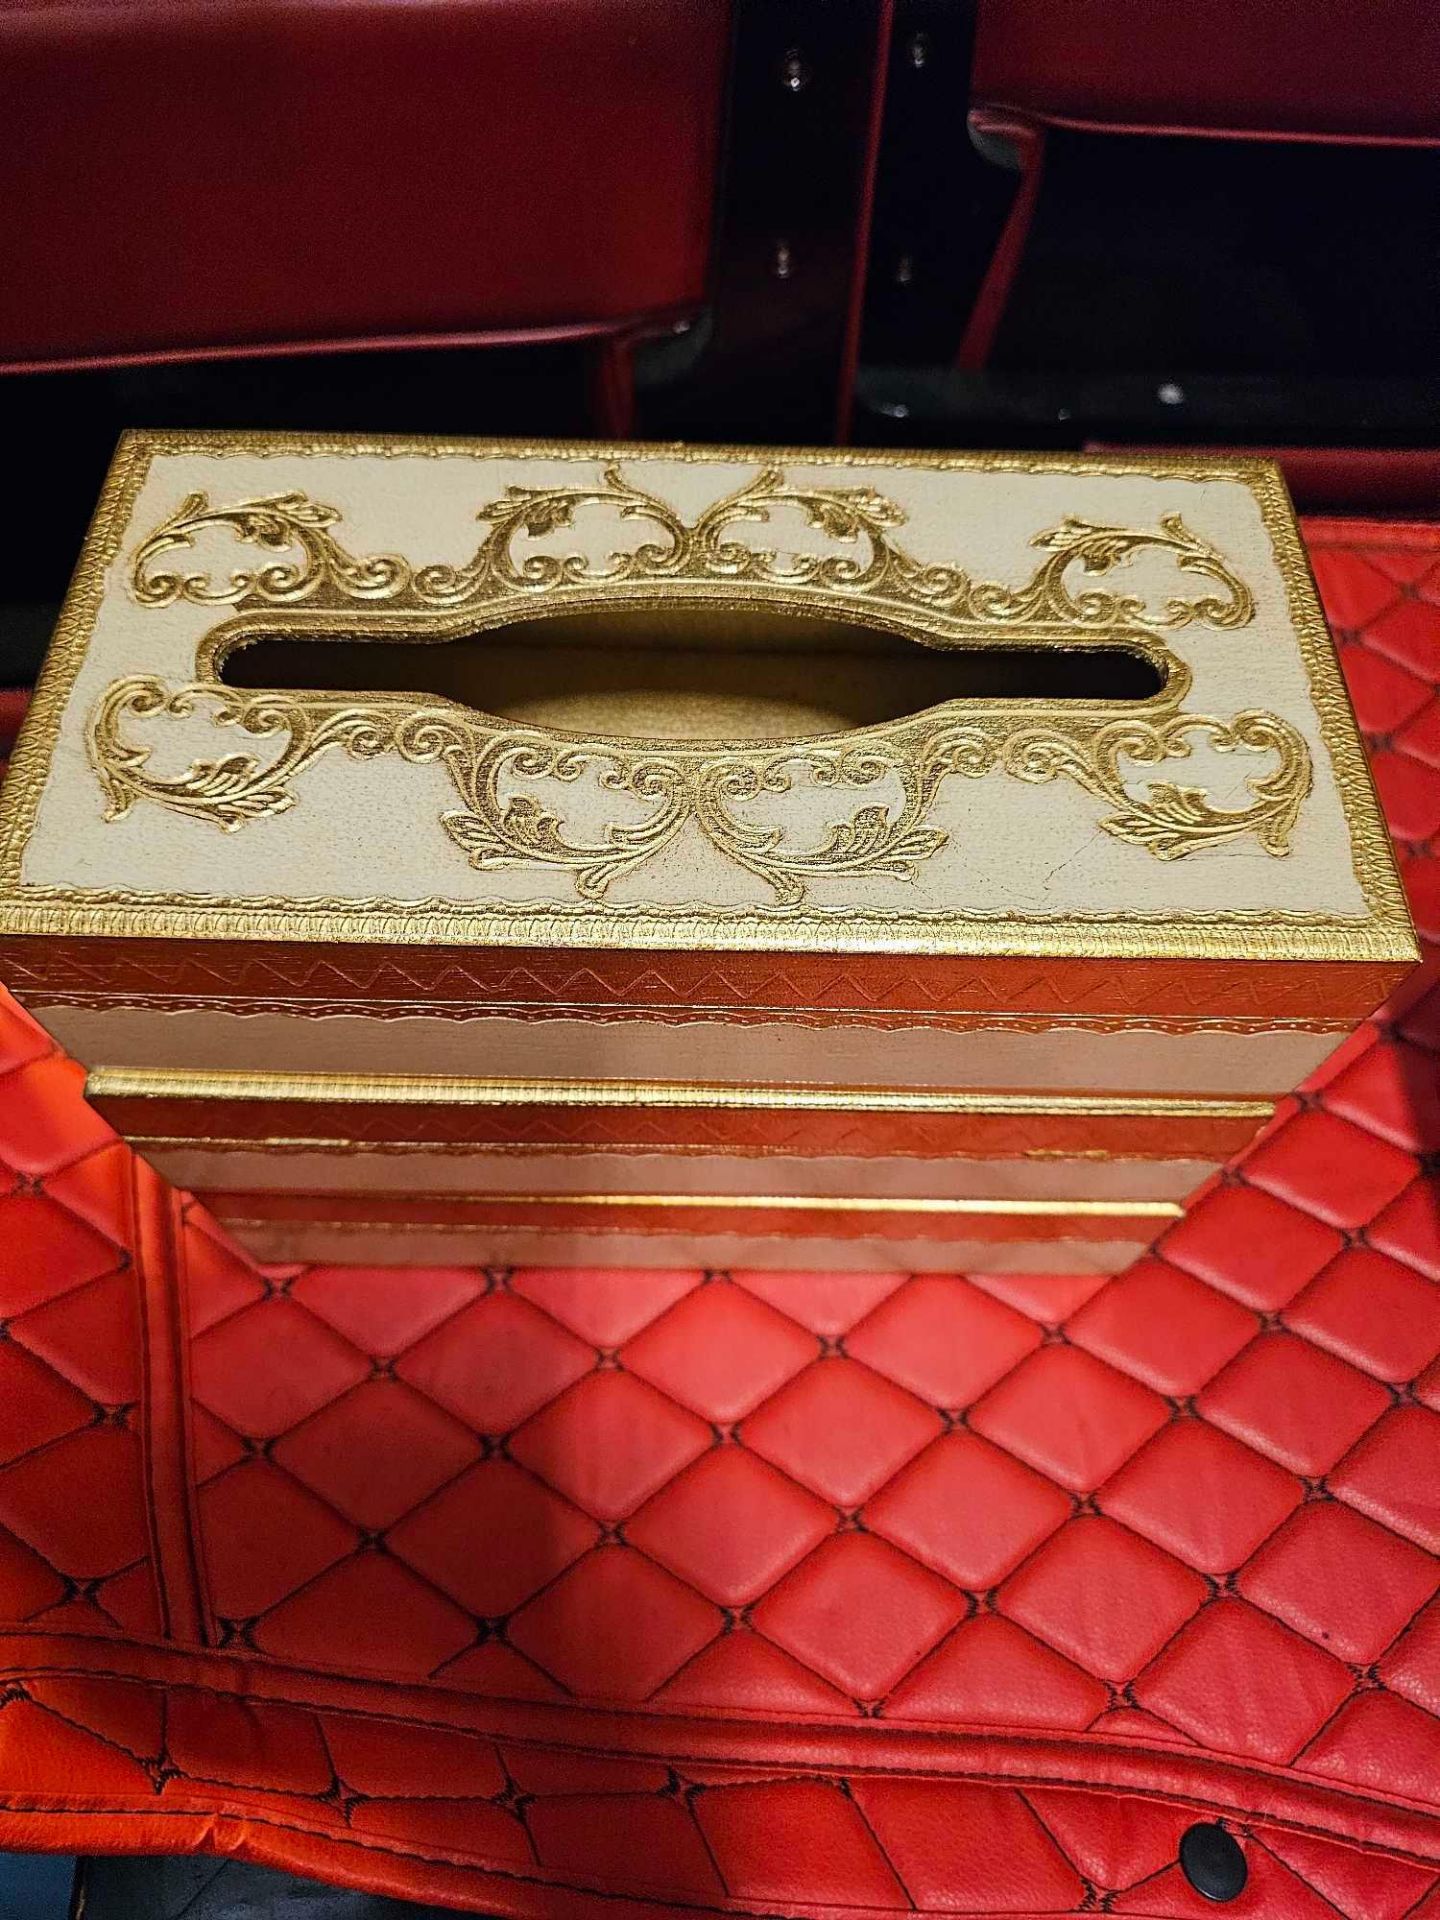 3 x Deluxe Vintage Hinged Tissue Box Cover With Gold Gilt Highlights Made In Italy 28cm